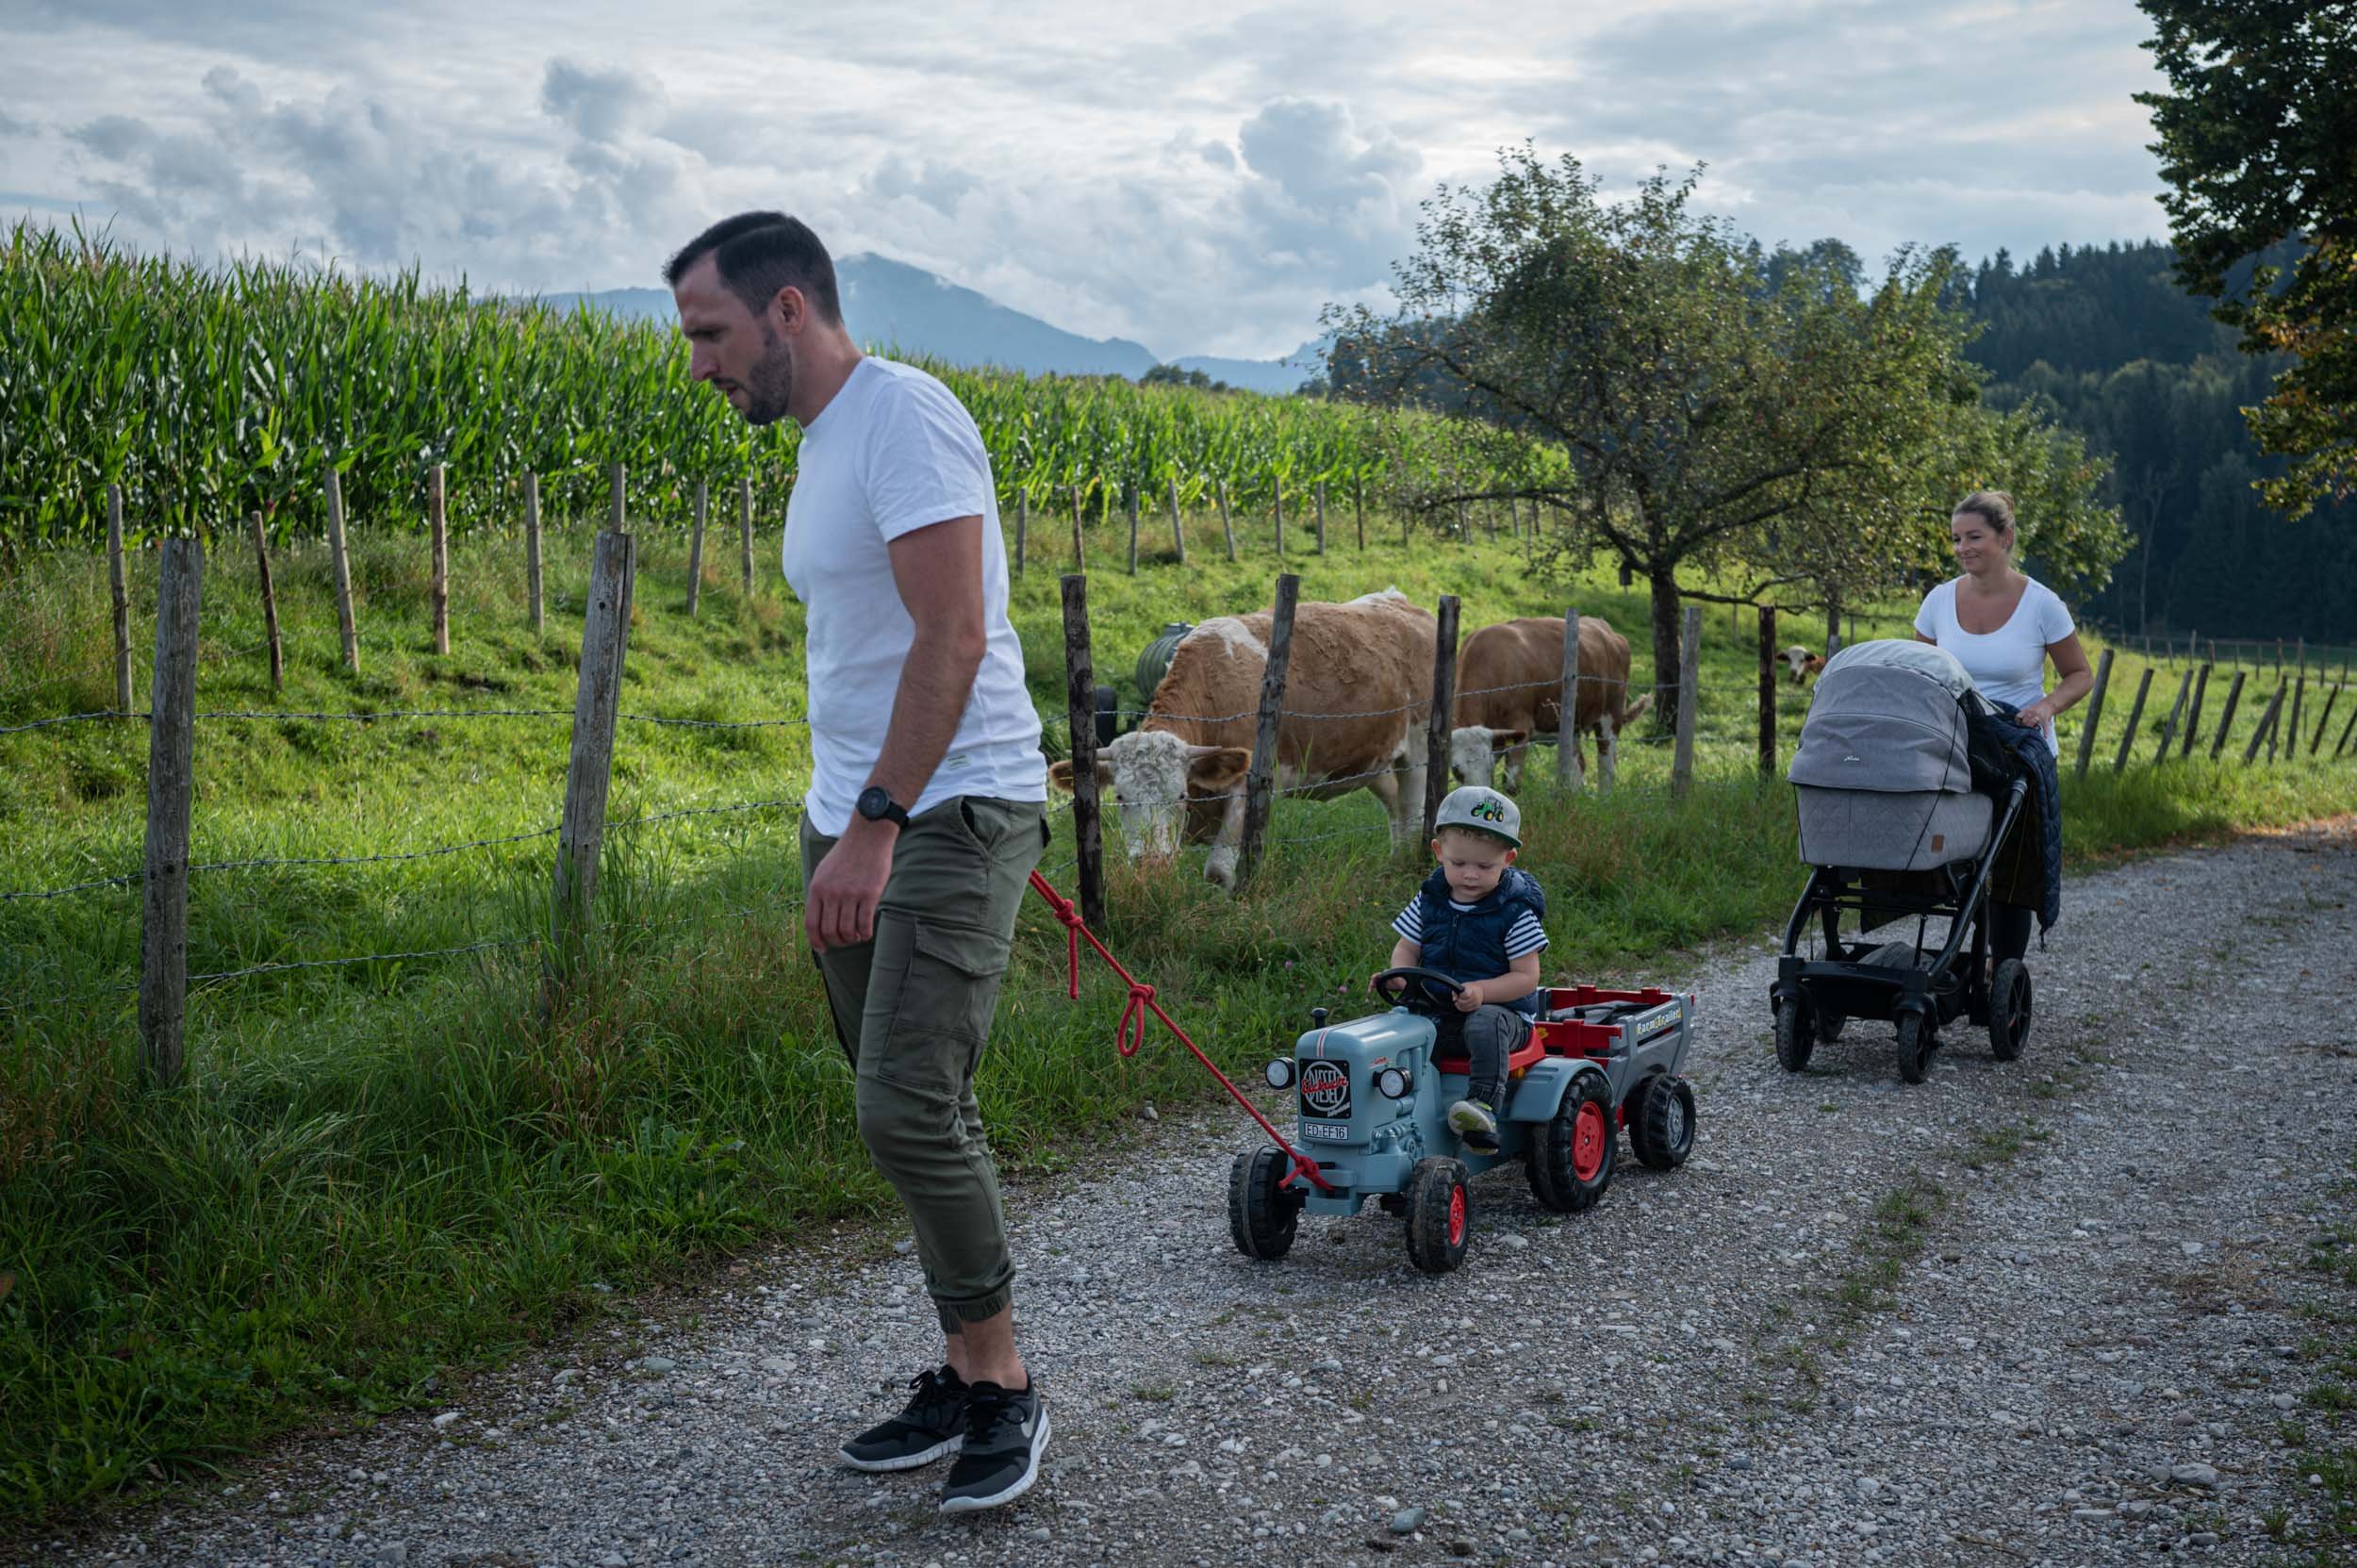  Helmut and Stephanie Wendlinger with their 2-year-old son, Xaver, and his newborn sister, Leni, in Bavaria.   